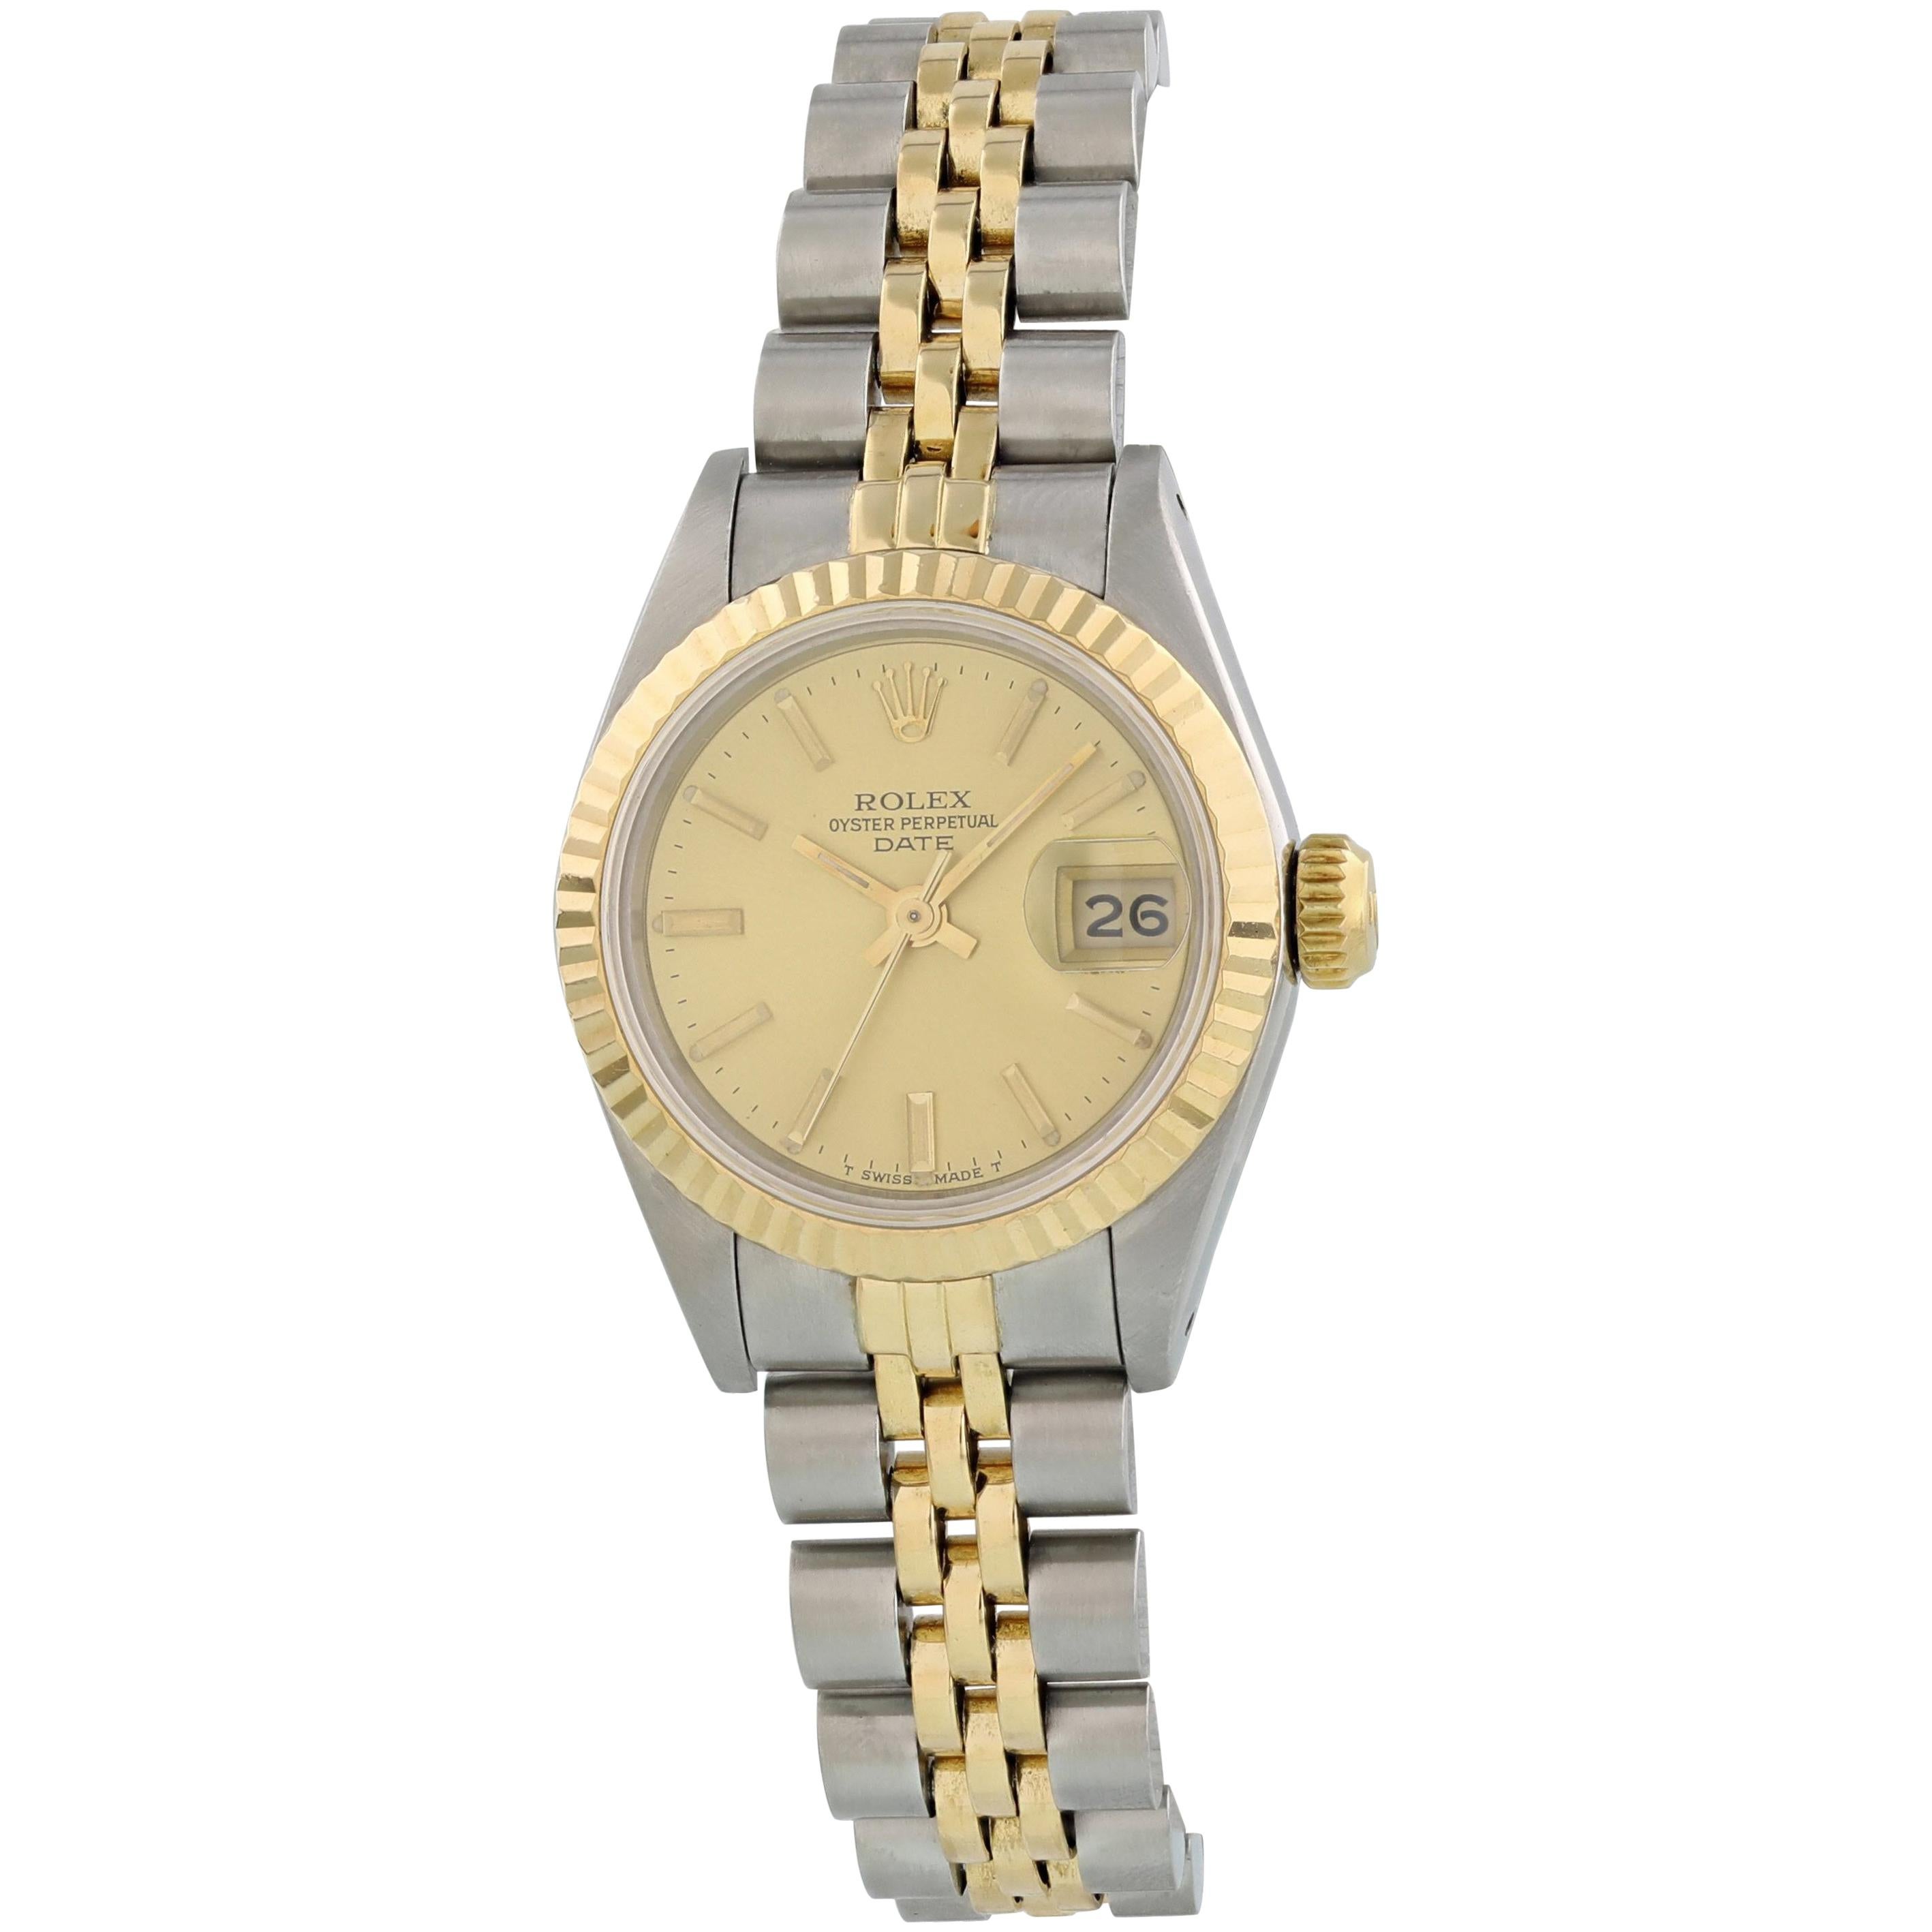 Rolex Oyster Perpetual Date 69173 Ladies Watch Original Papers